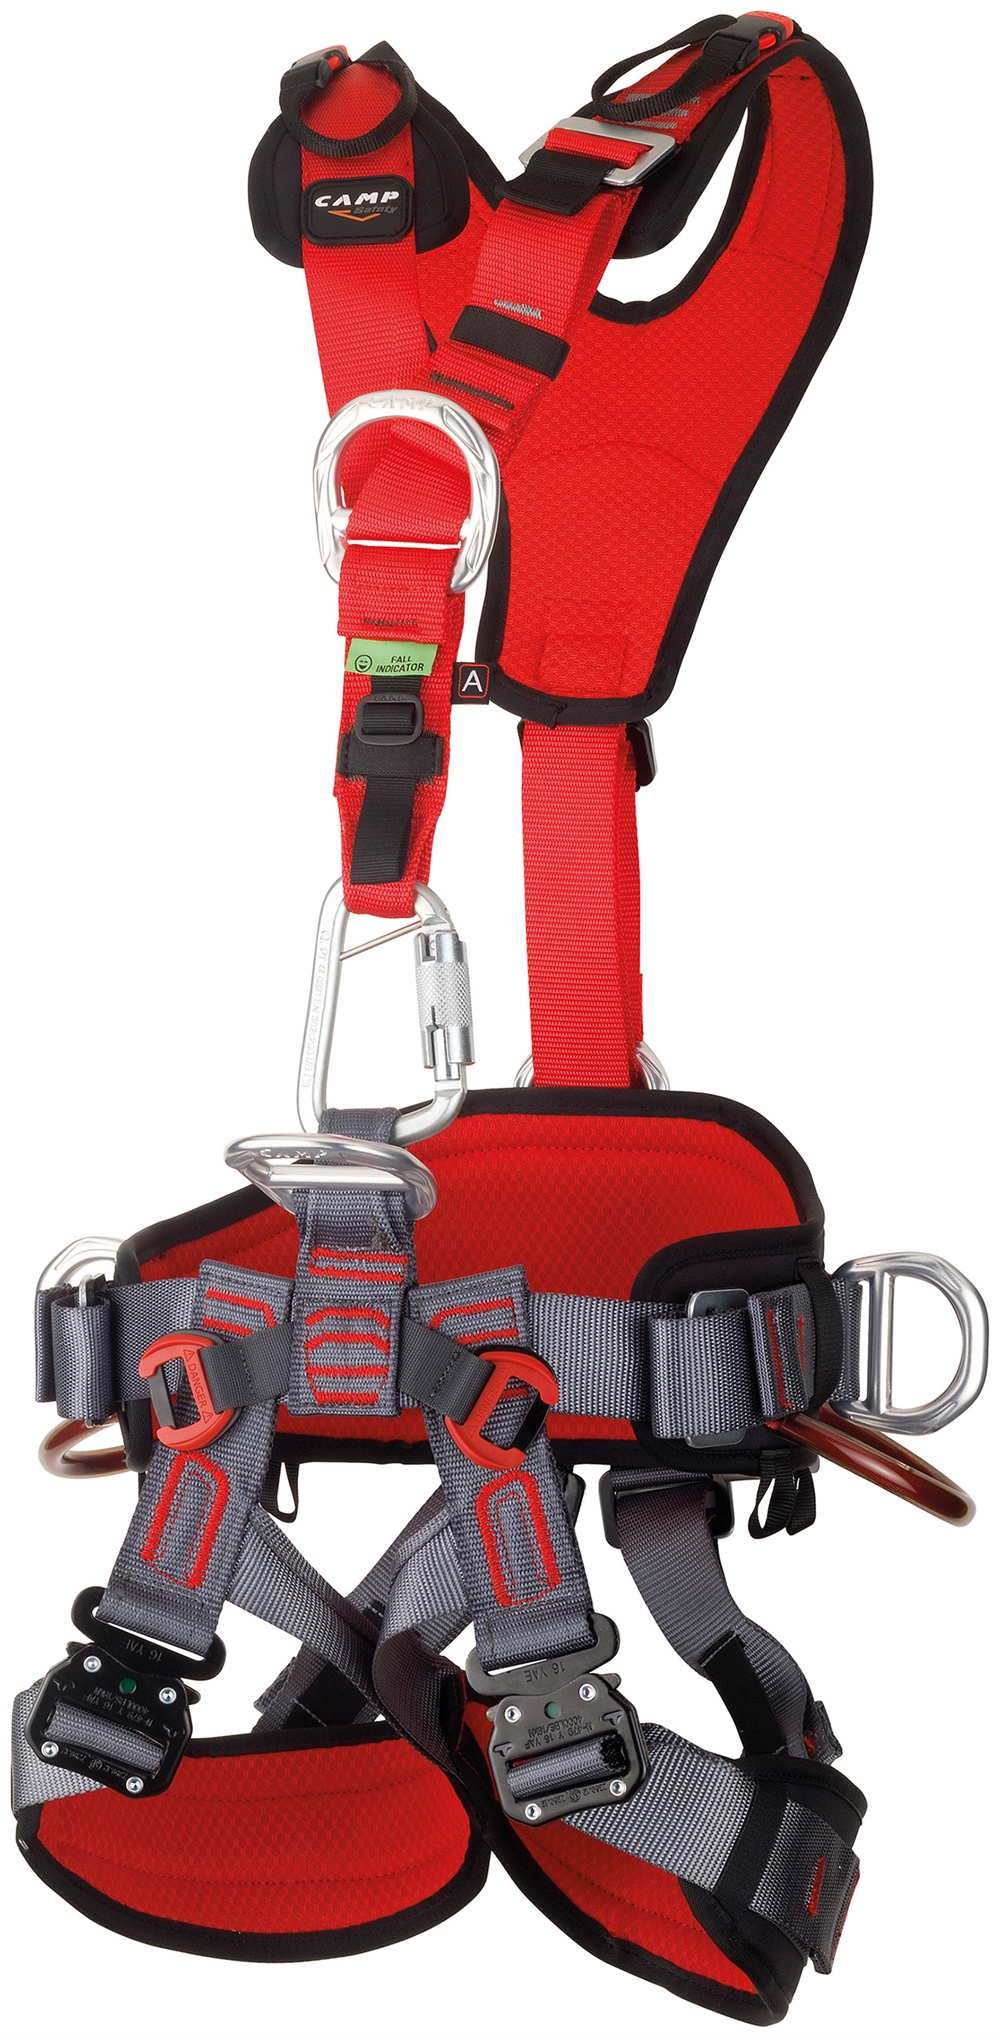 CAMP GT ANSI Full Body Fall Arrest Rope Access Harness Large - XXL